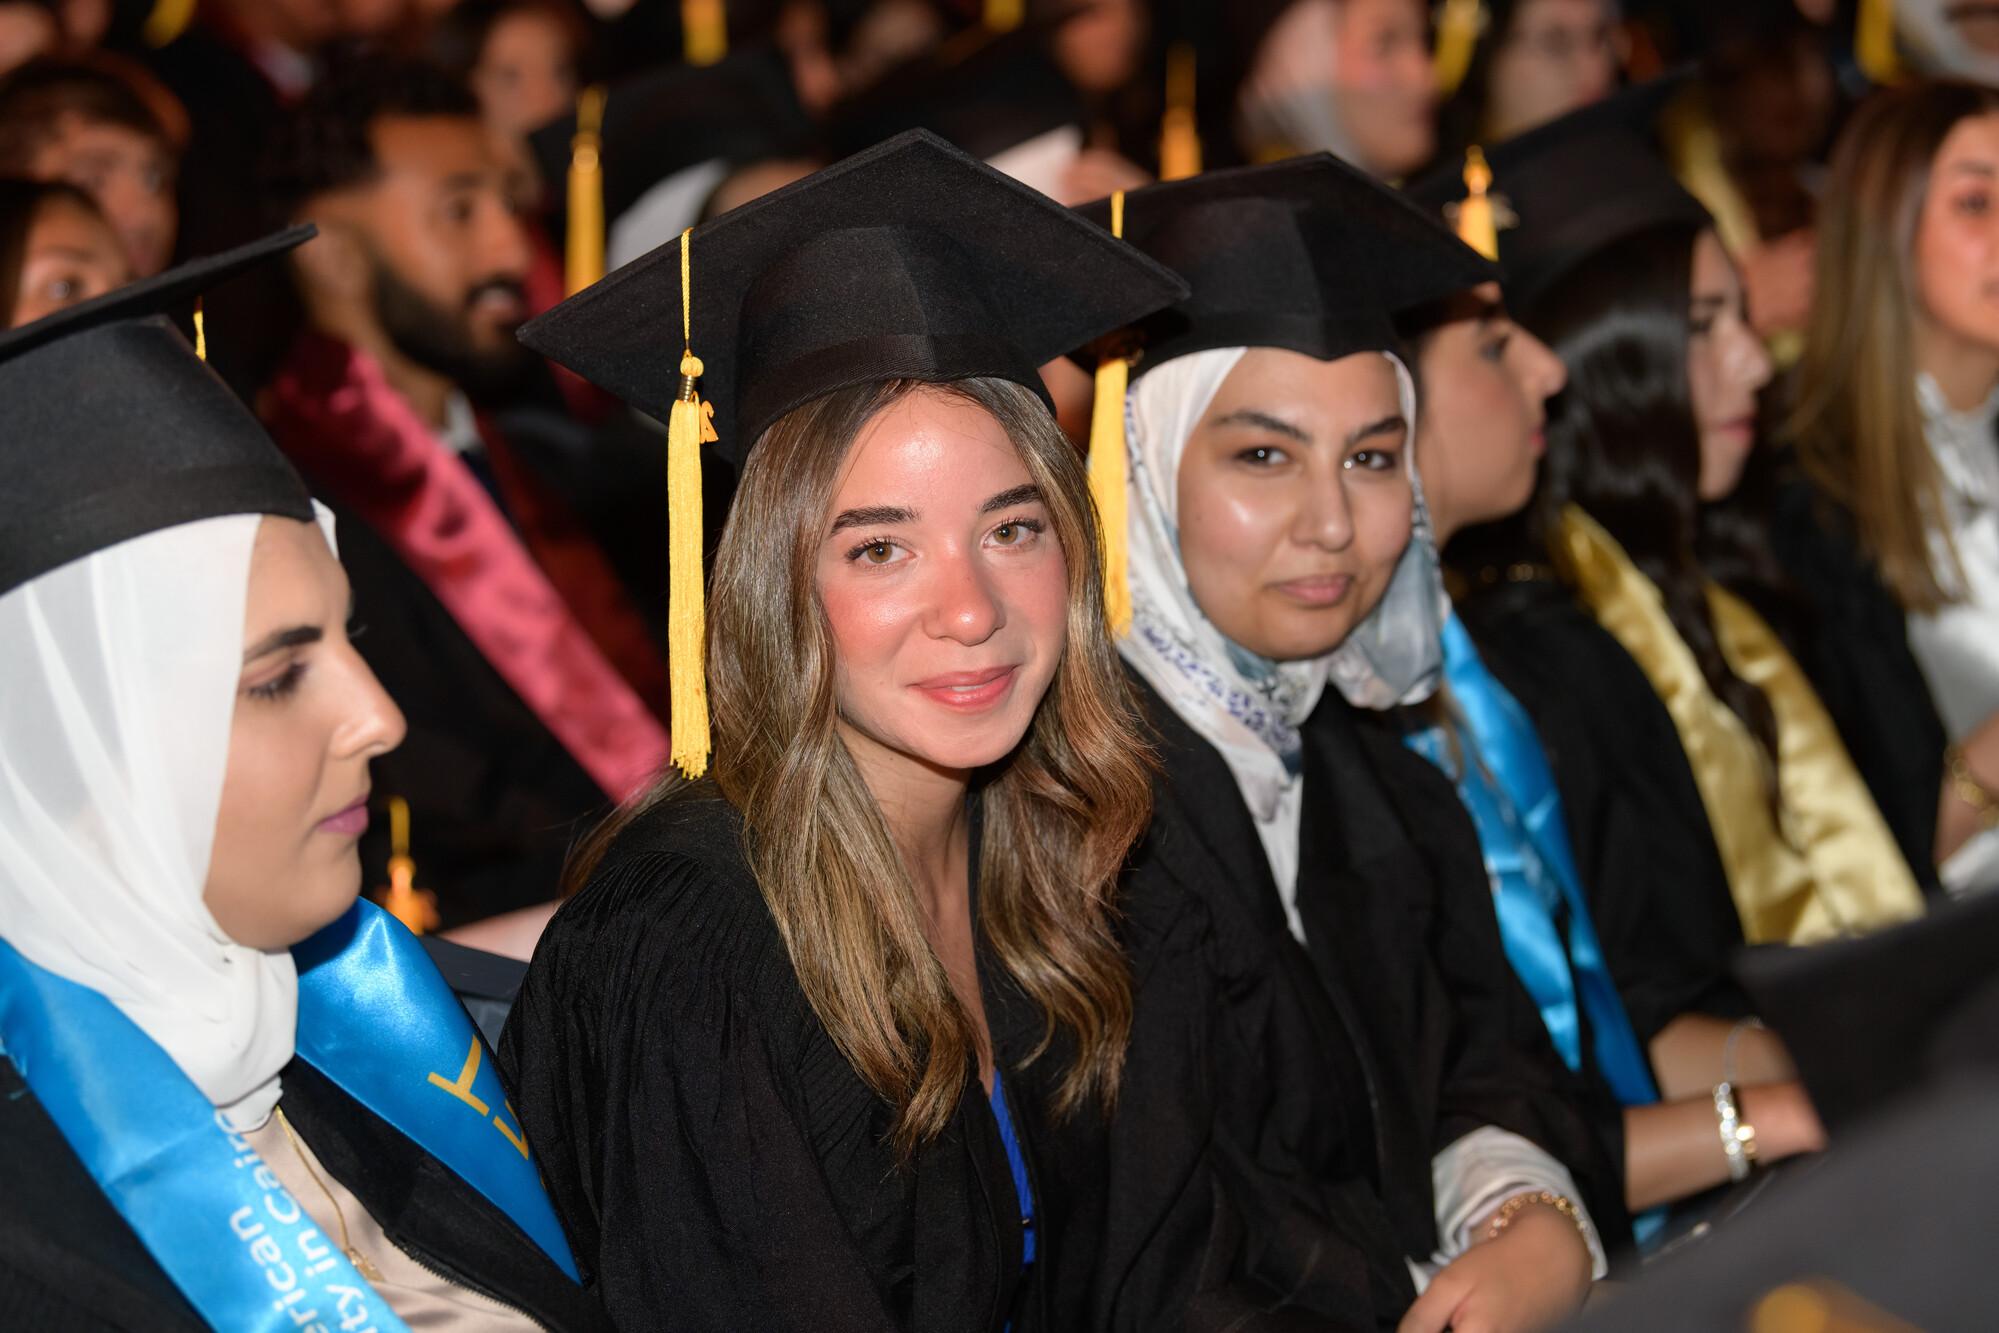 smiling students in commencement wearing cap and gown for their graduation